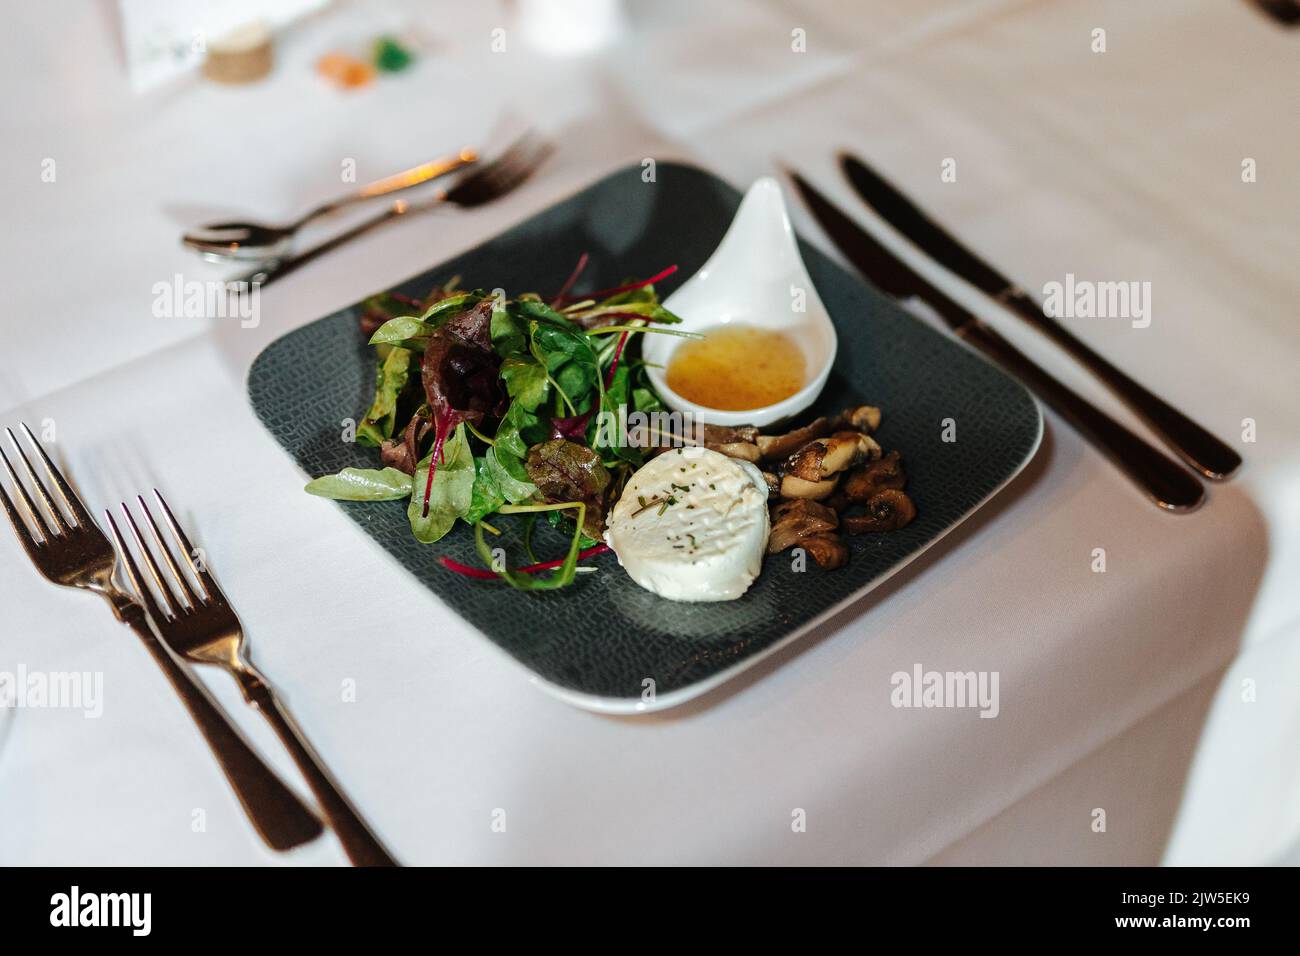 Delicious dinner beautifully arranged on a dinner plate. Stock Photo